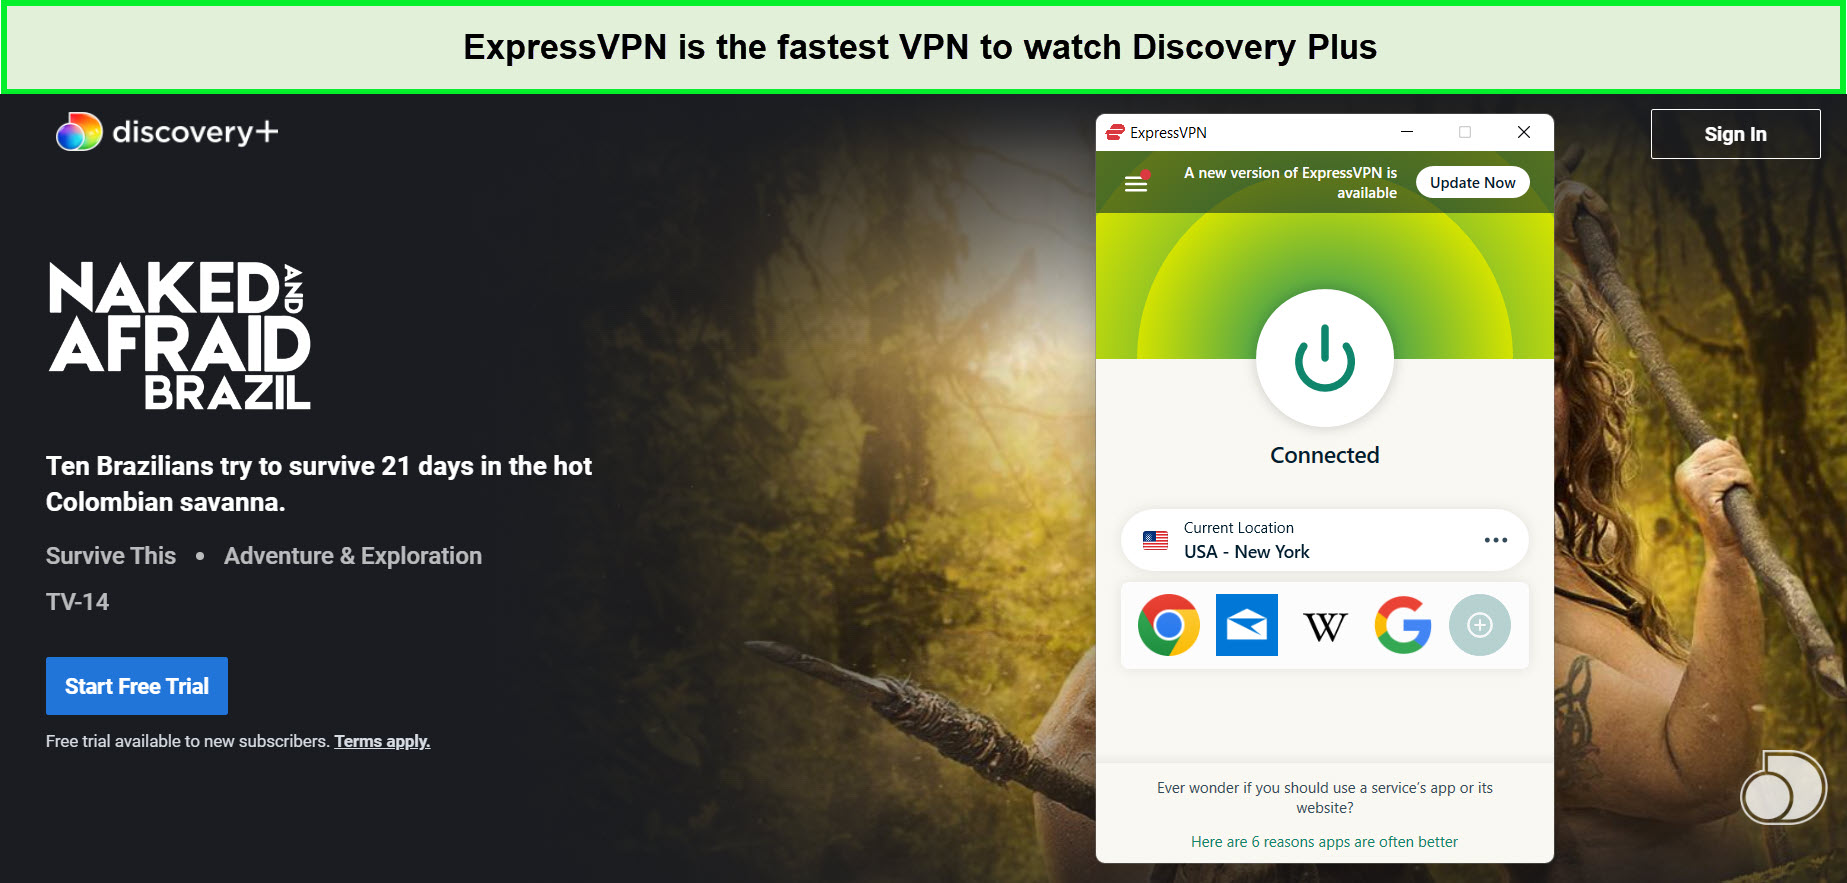 expressvpn-is-the-best-vpn-to-watch-naked-and-afraid-brazil-season-16-on-discovery-plus-outside-usa